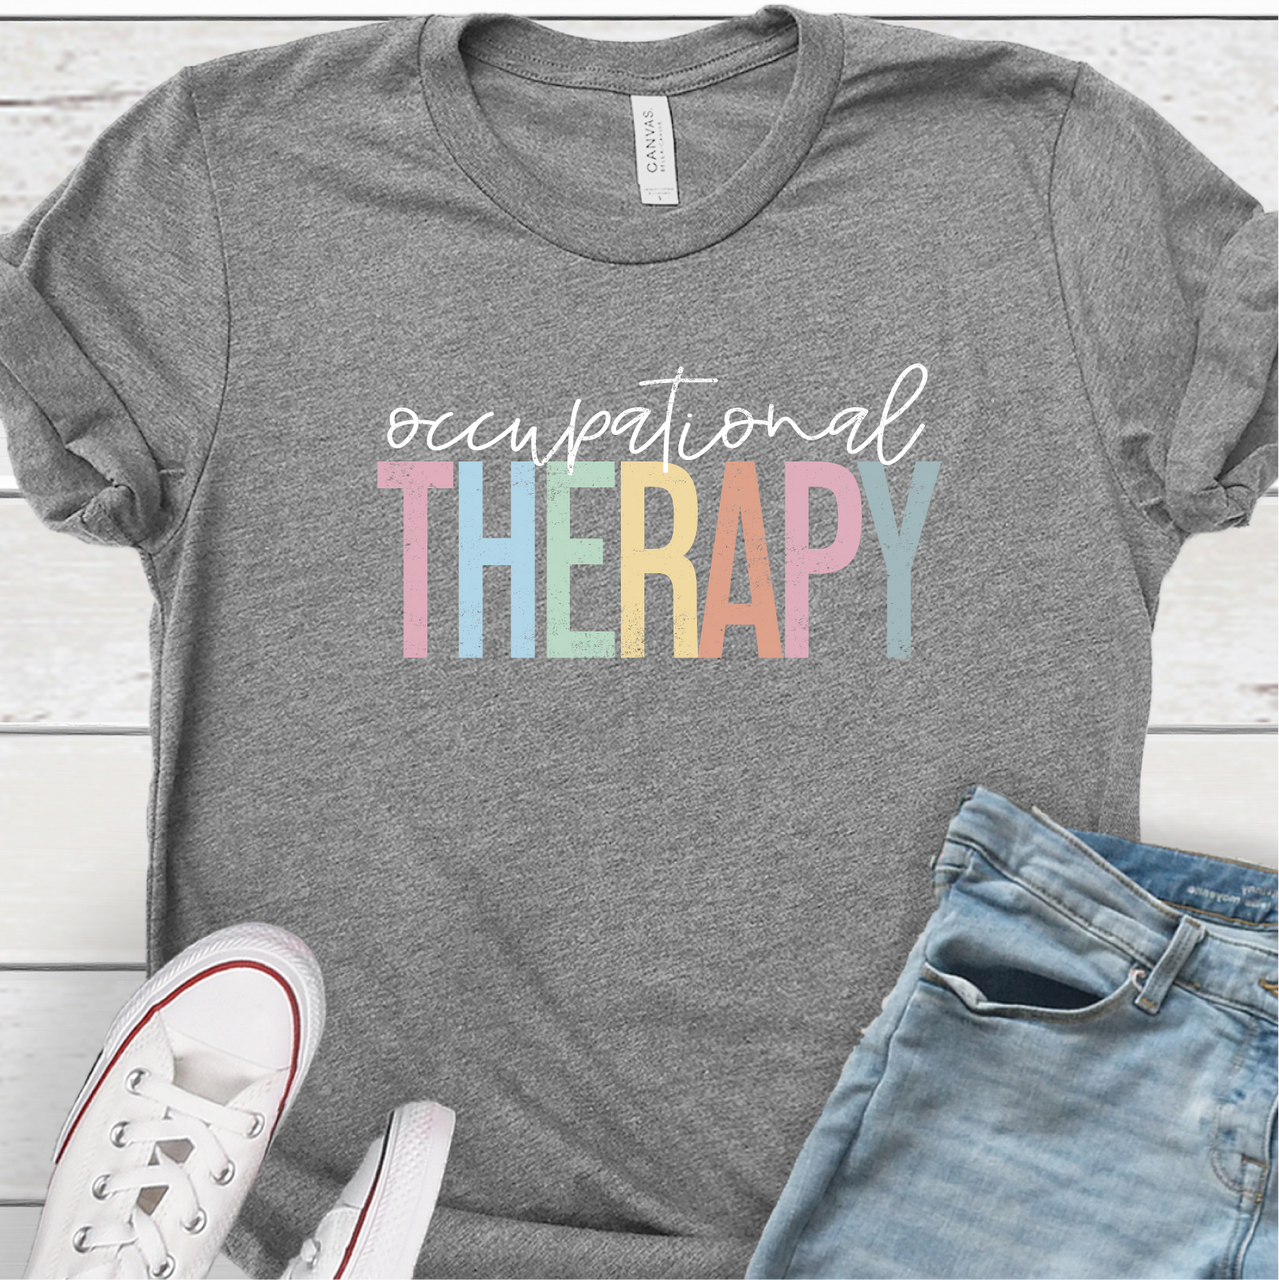 "Occupational Therapy" Shirt - Customize it with Your Name/Campus/District